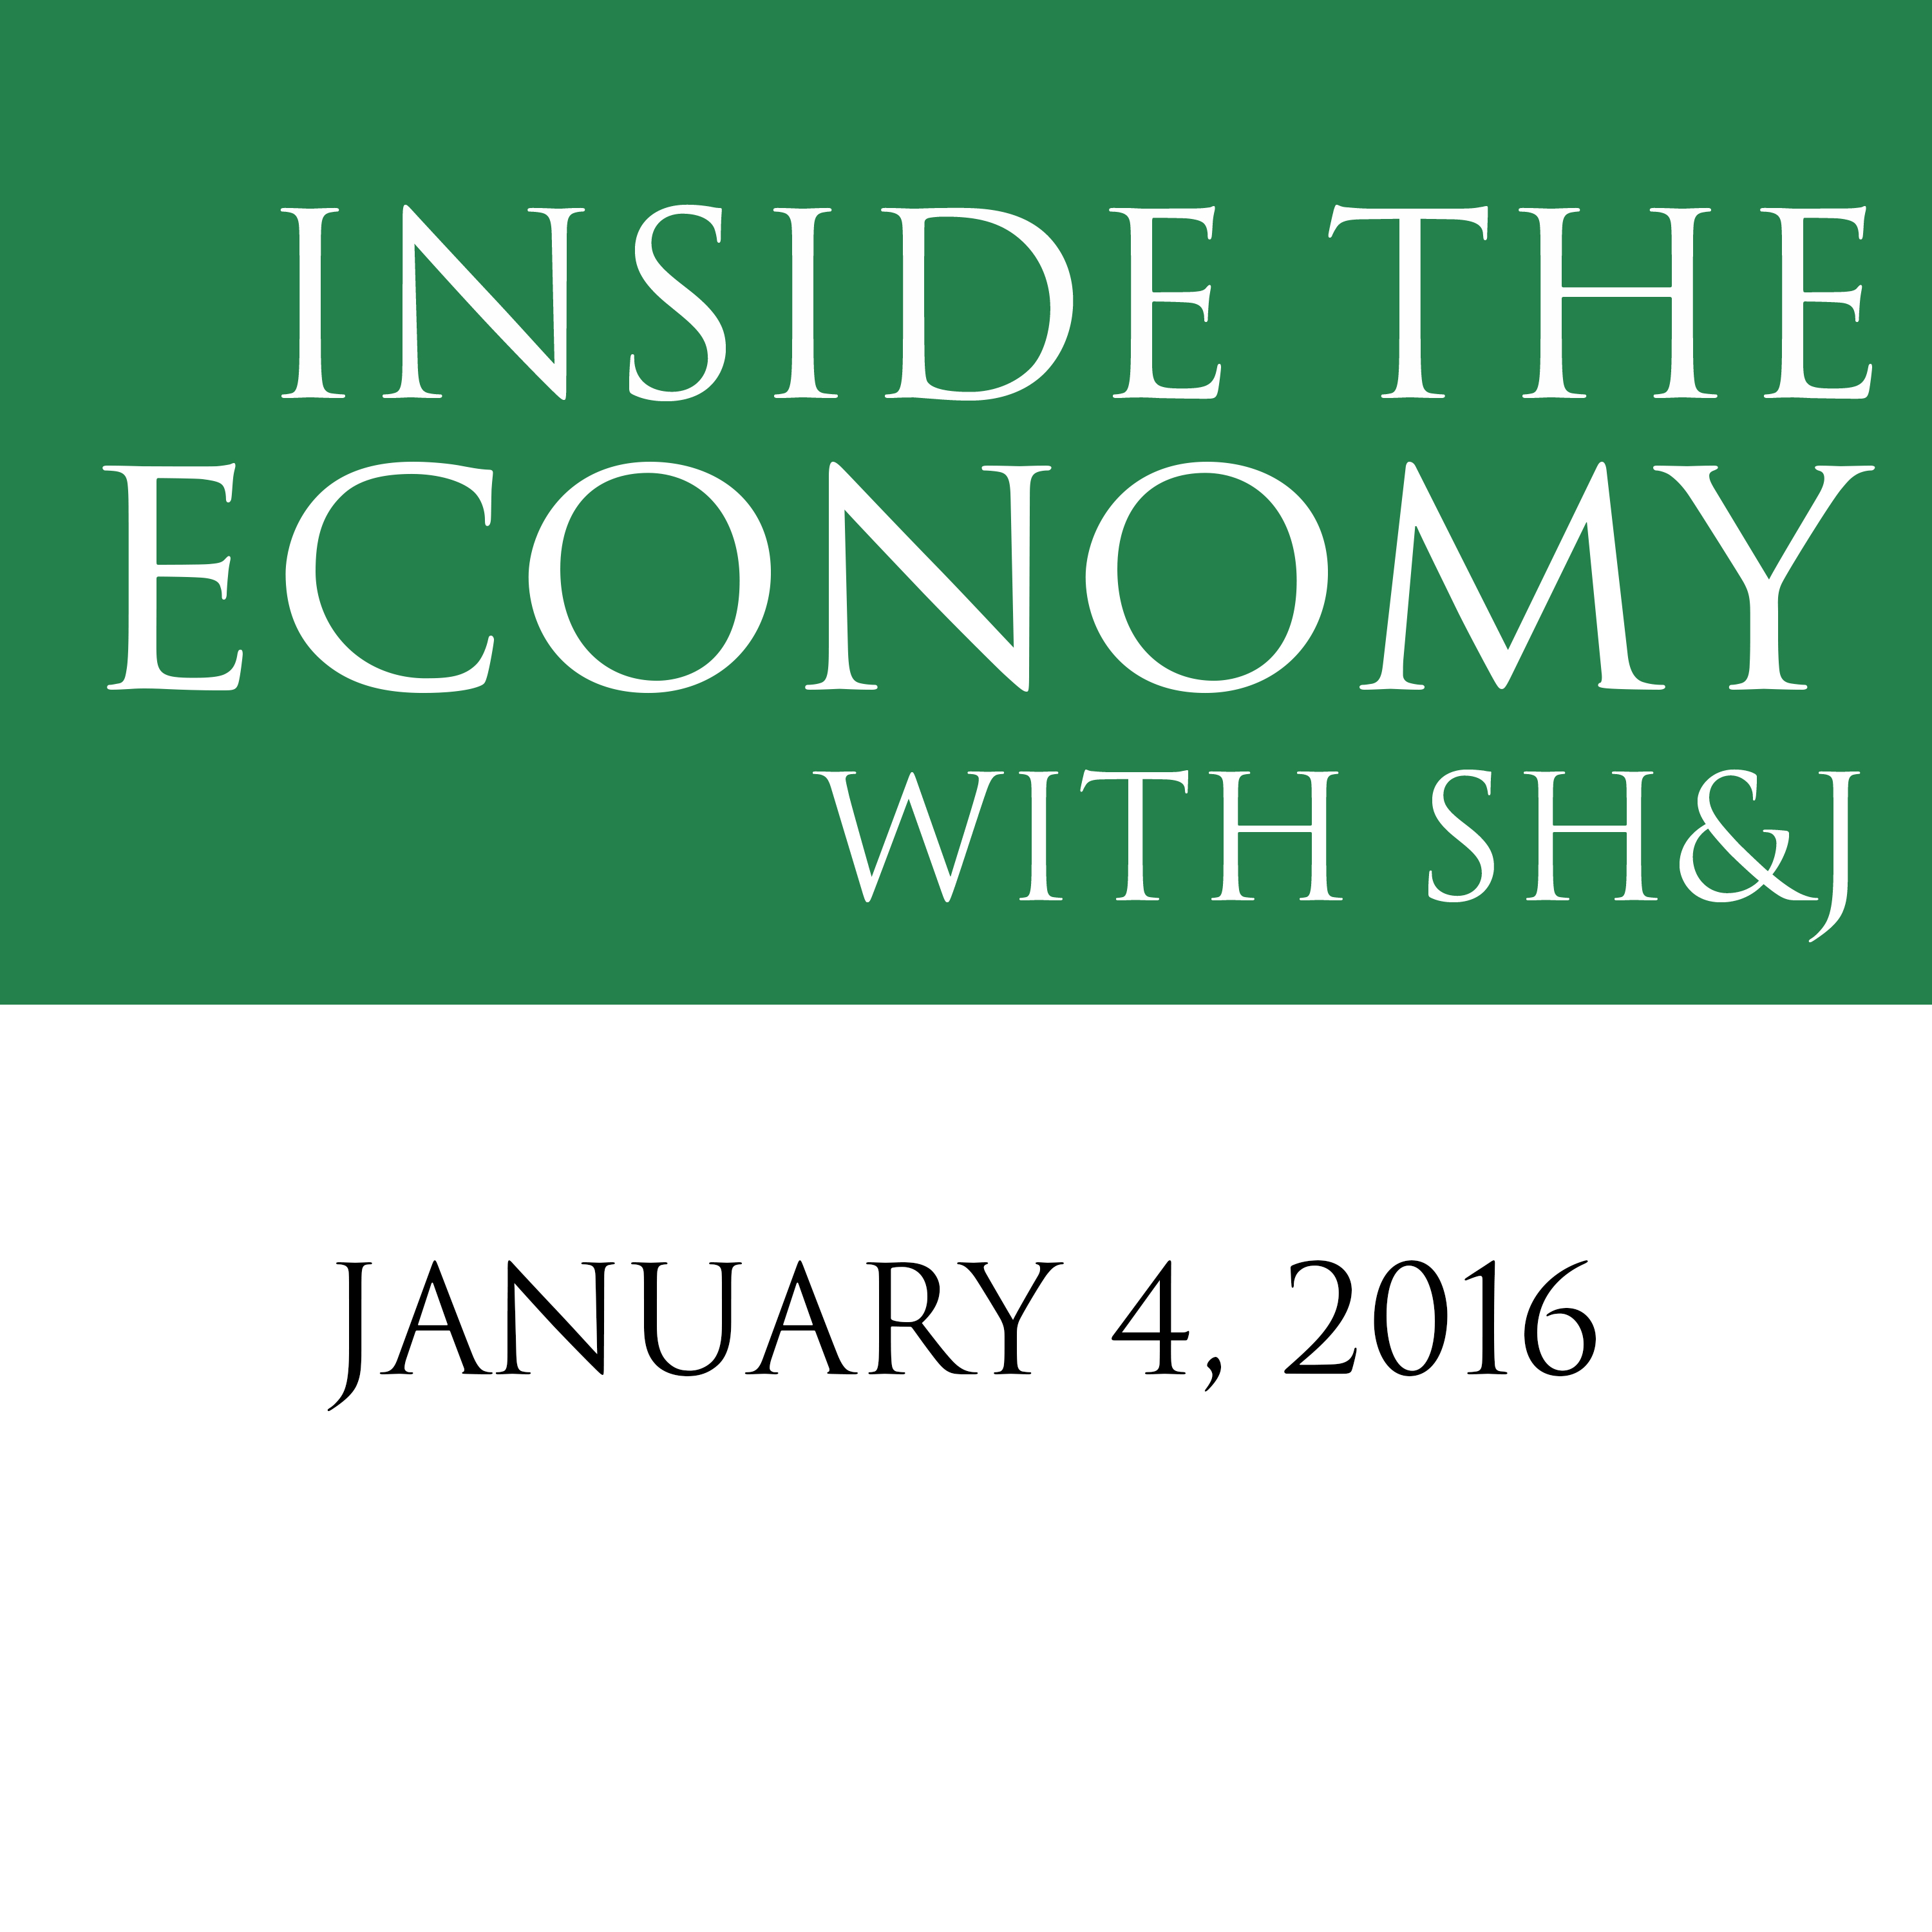 January 4, 2016  --  Inside the Economy With SH&J